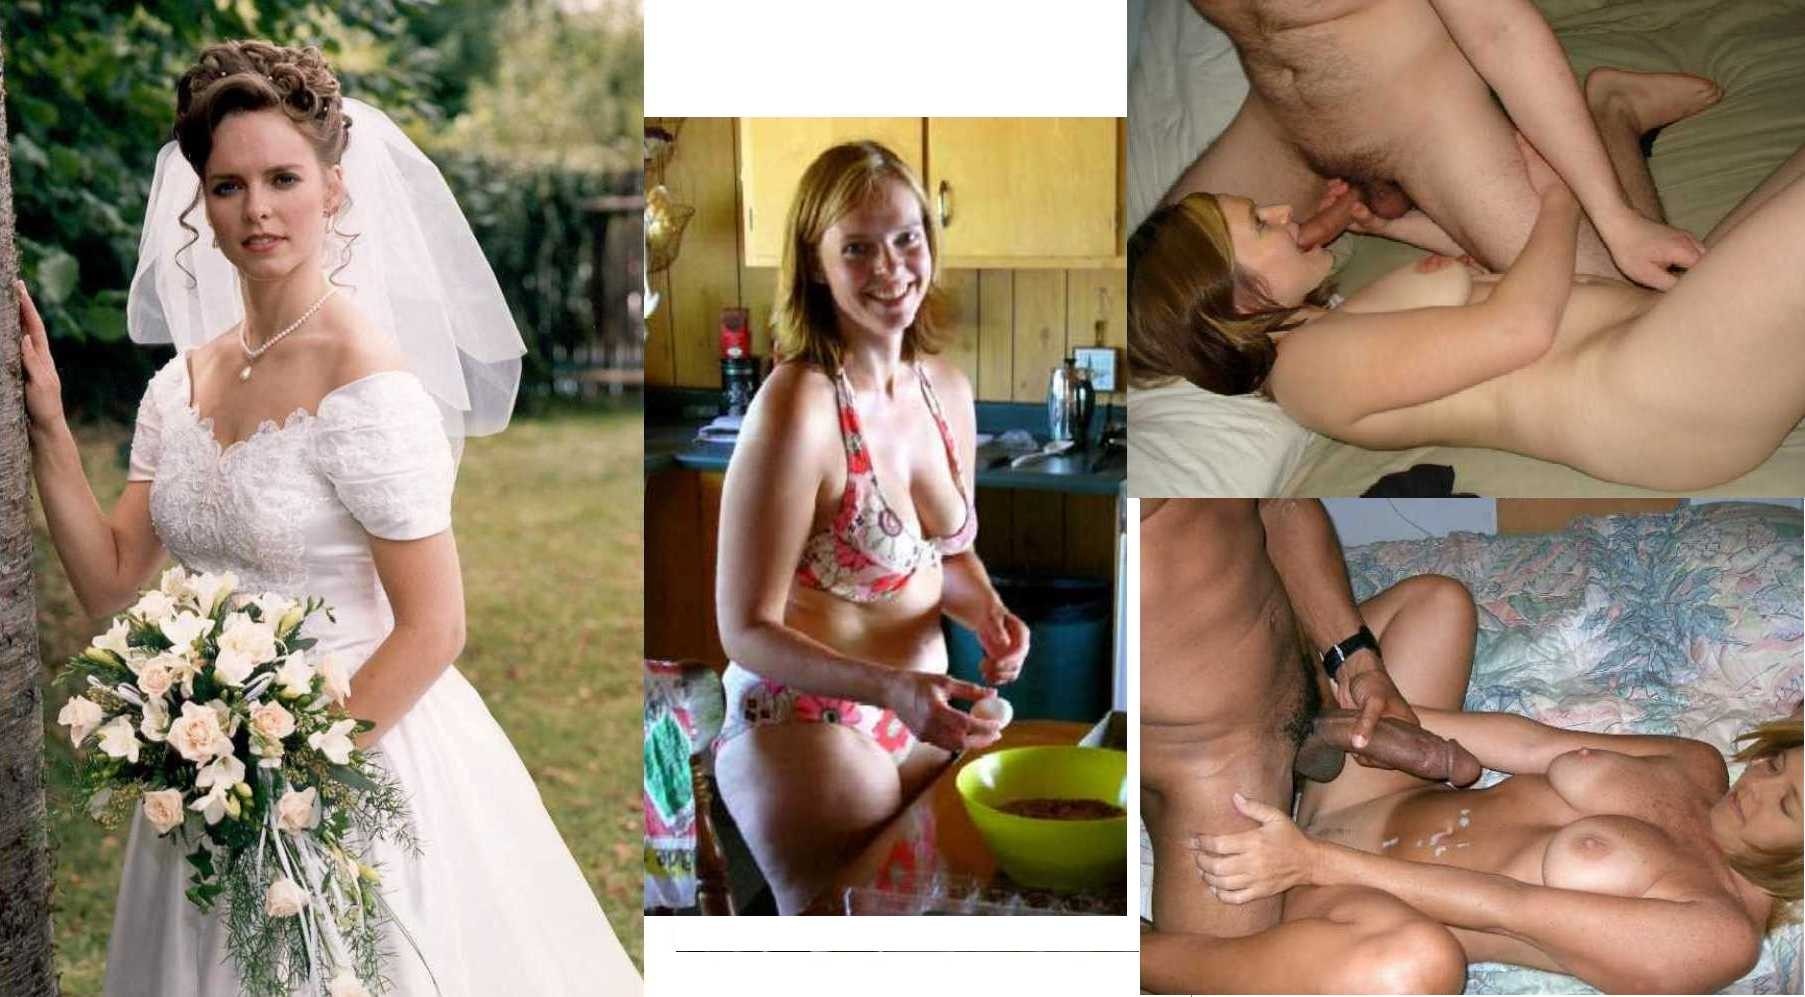 Russian Married Whores with A Wedding Ring Private (65 photos)